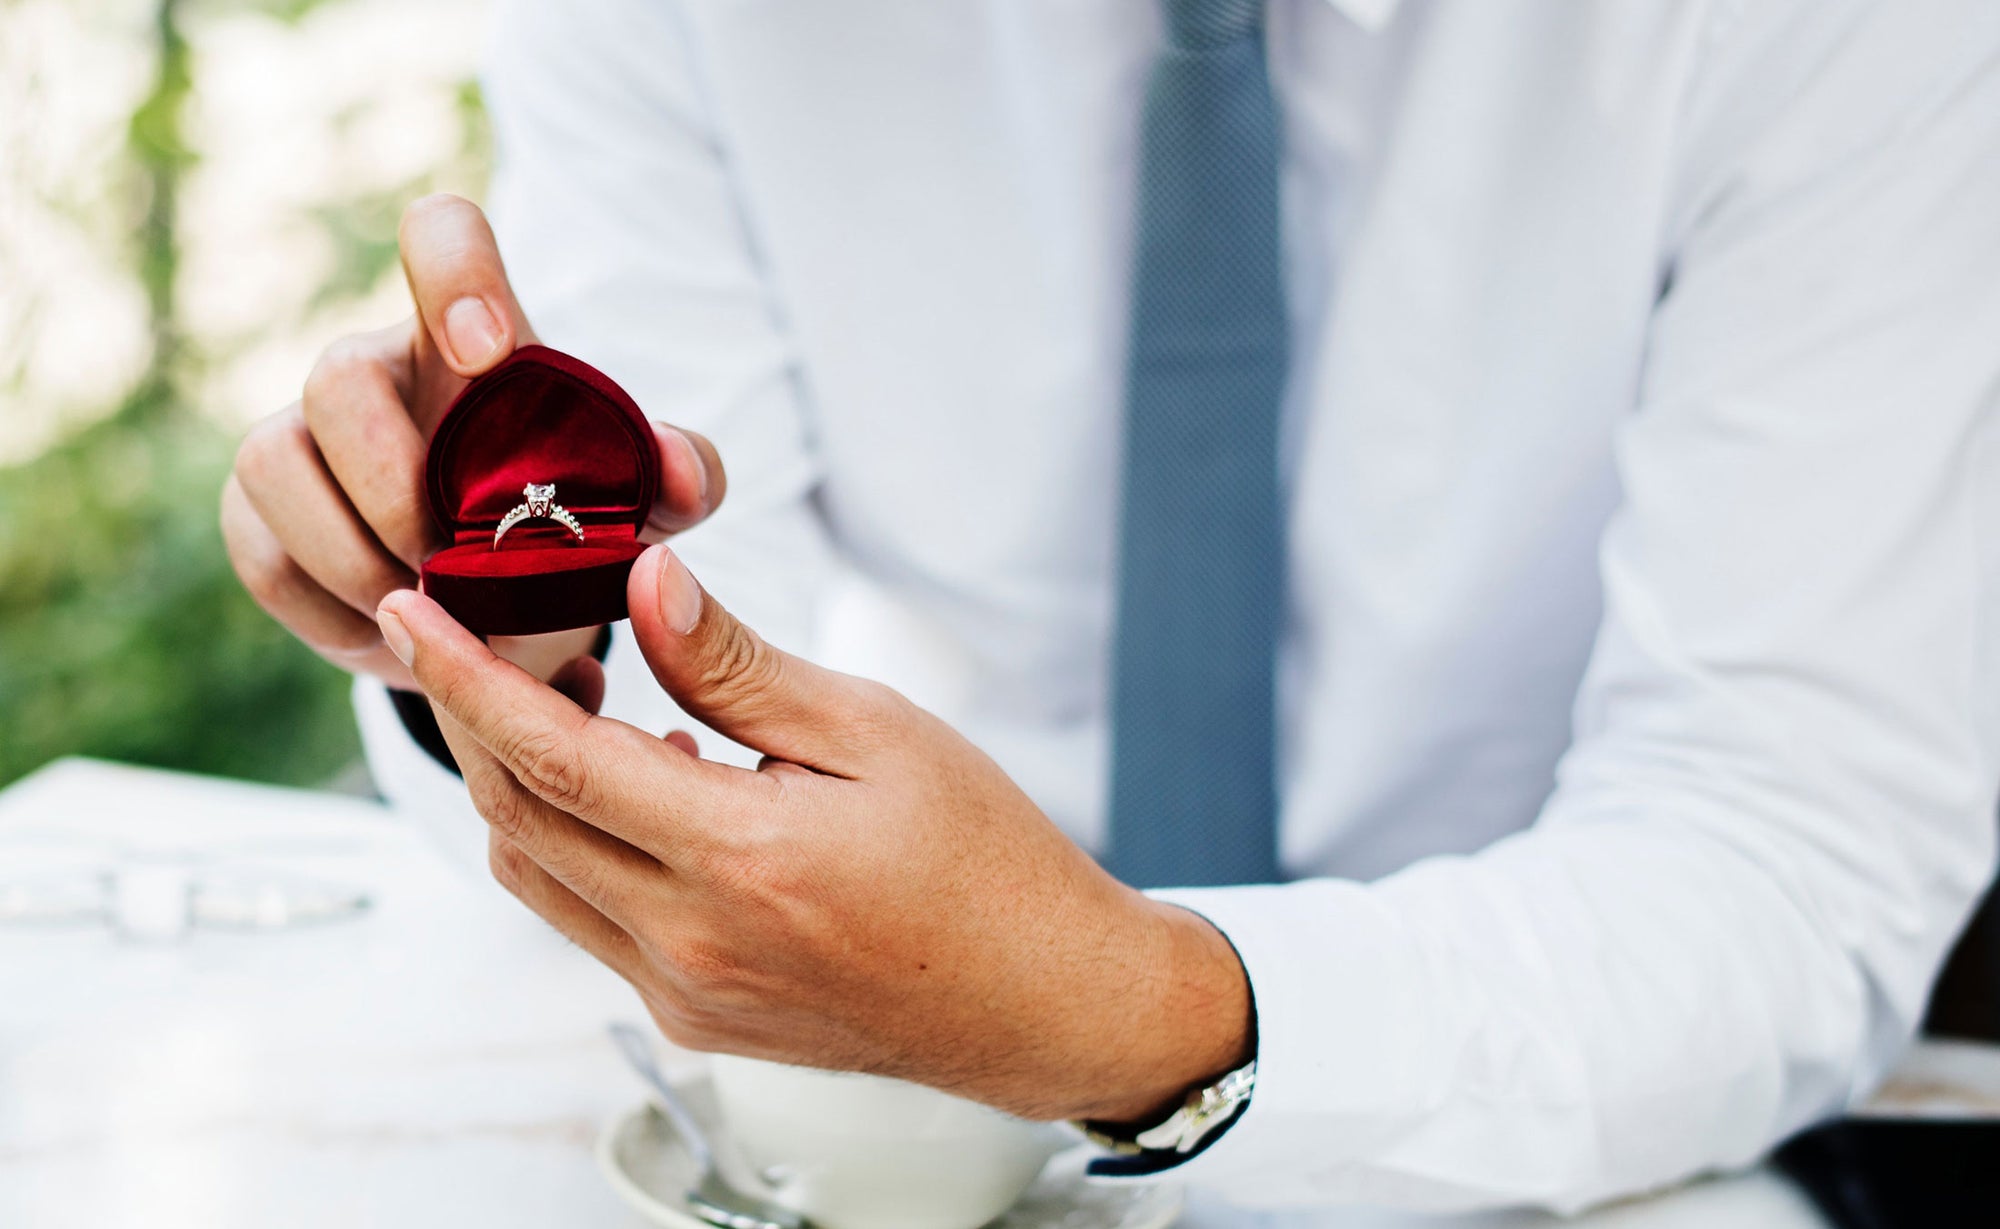 Finding the perfect engagement ring